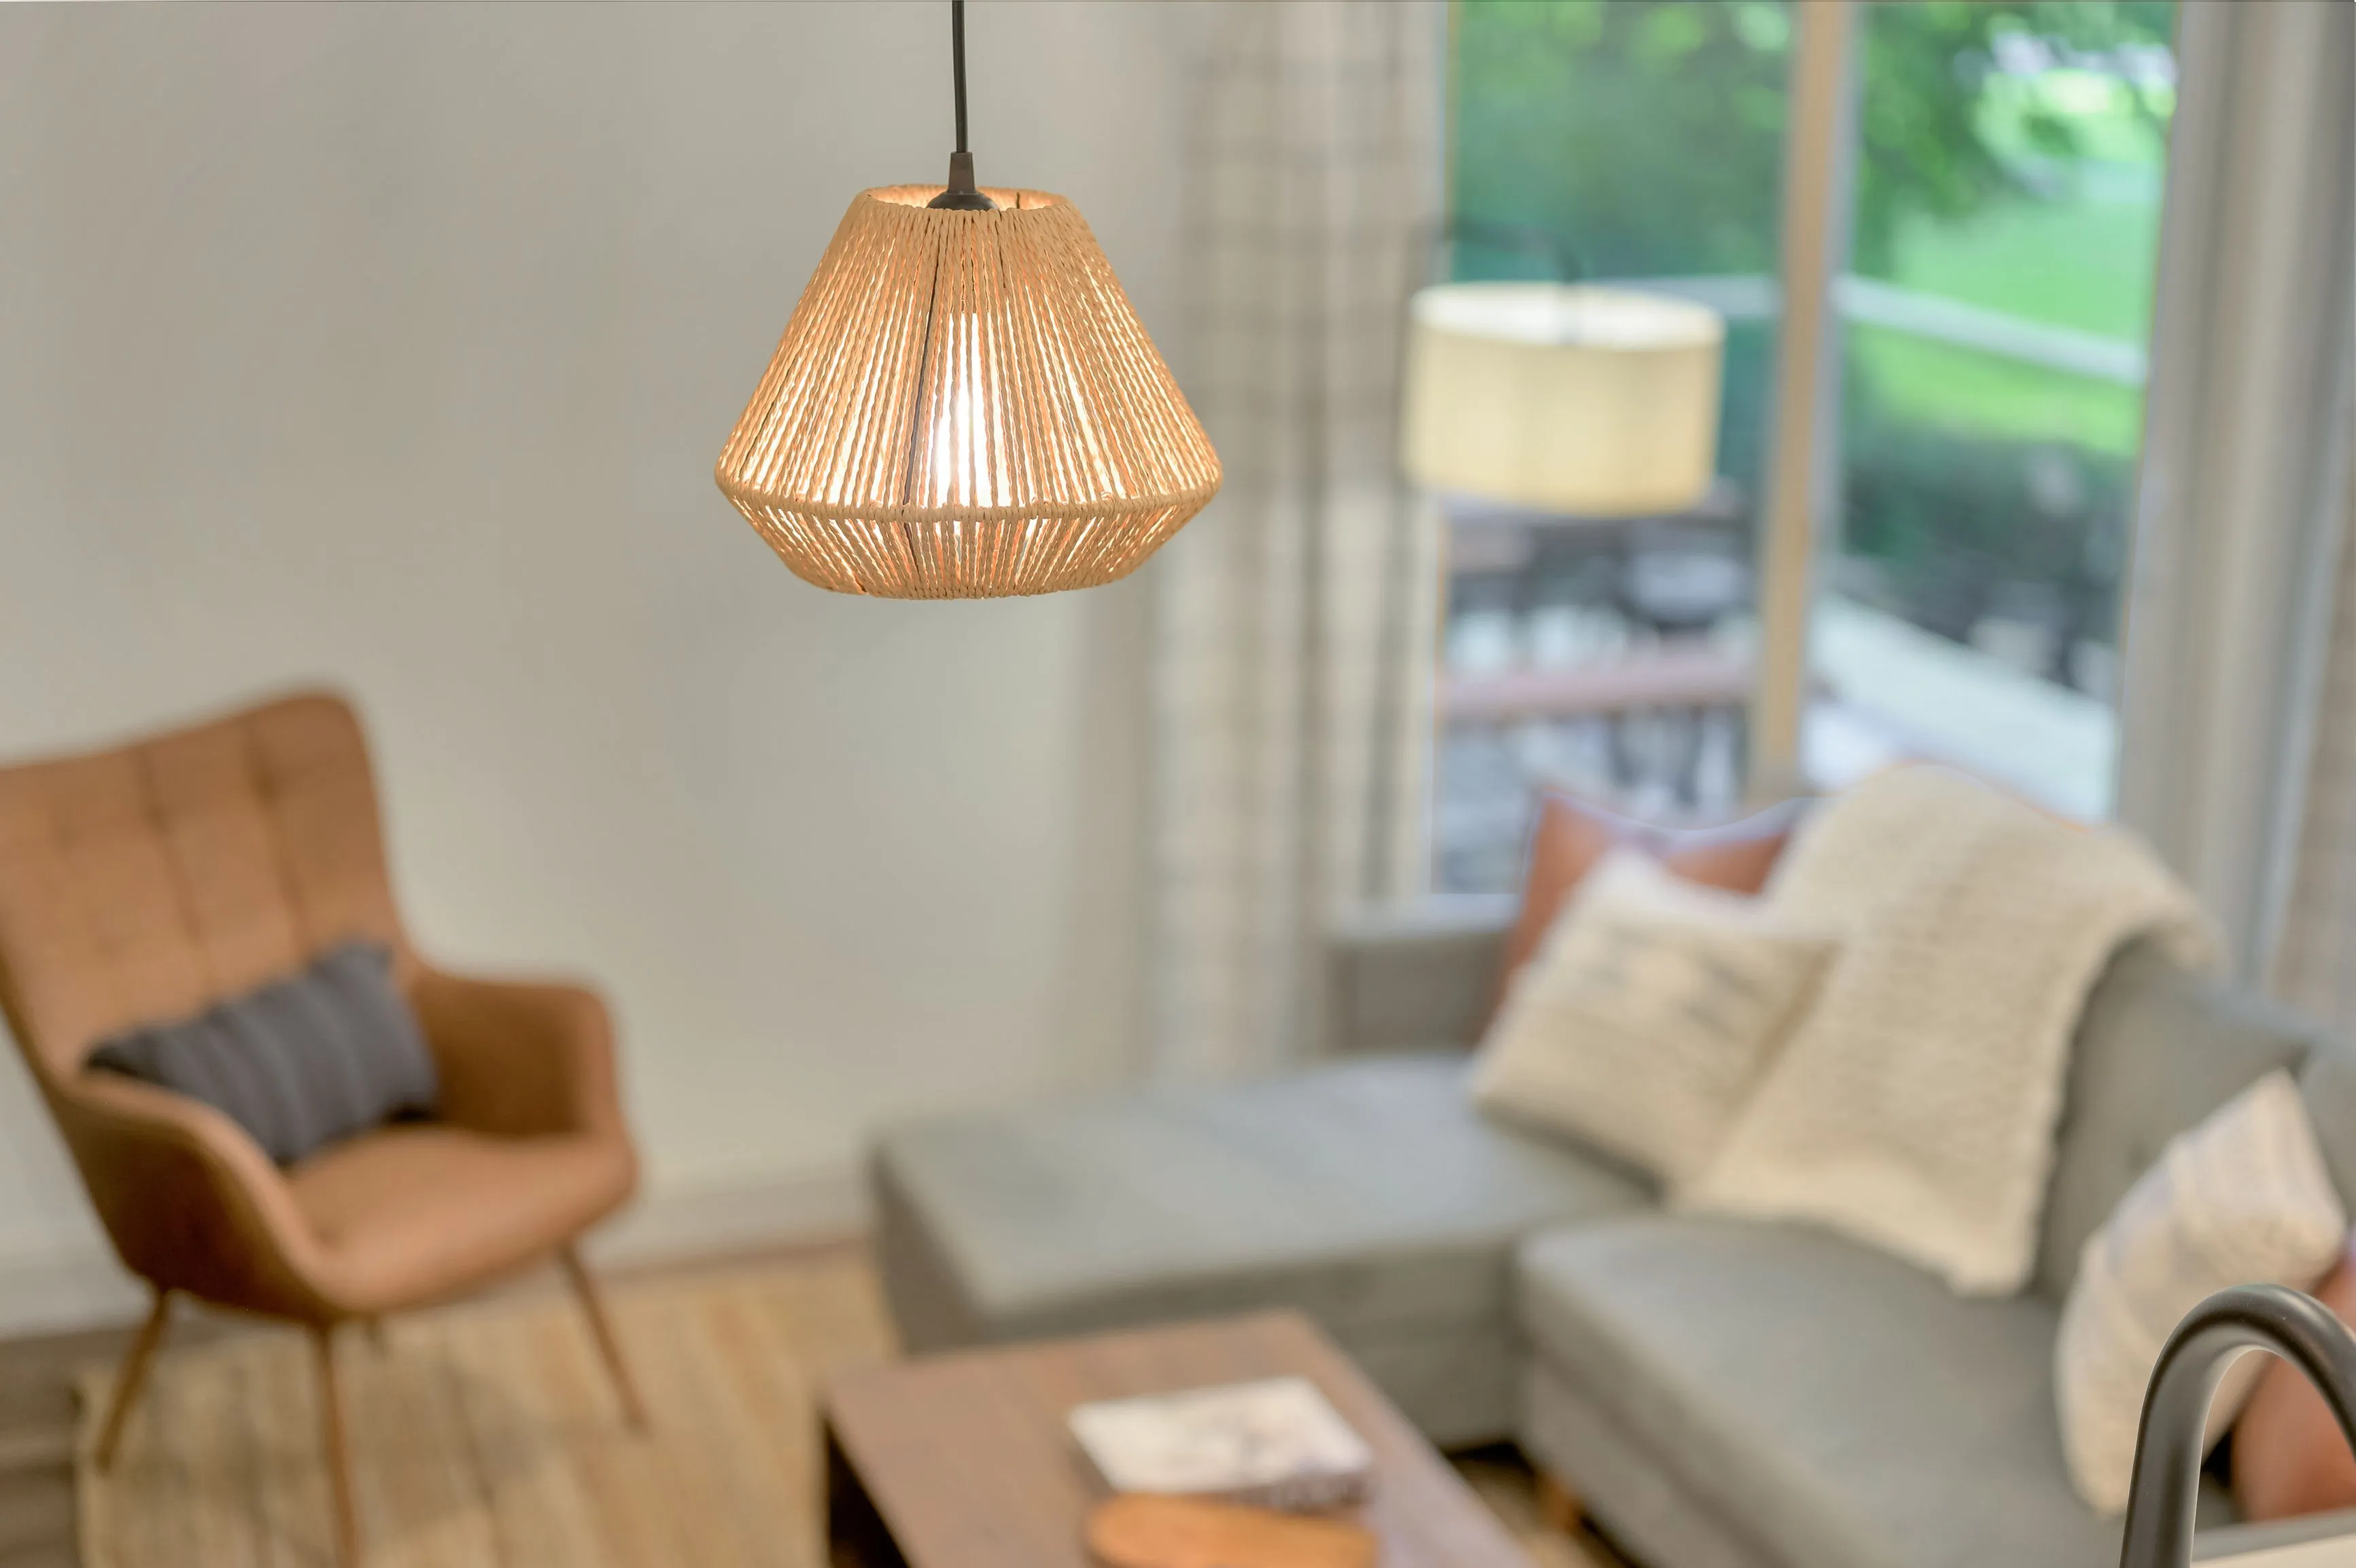 A warmly lit interior with a focus on a stylish pendant lamp hanging above a wooden coffee table, with a blurred background showcasing a cozy living room corner with an armchair and a couch adorned with cushions.